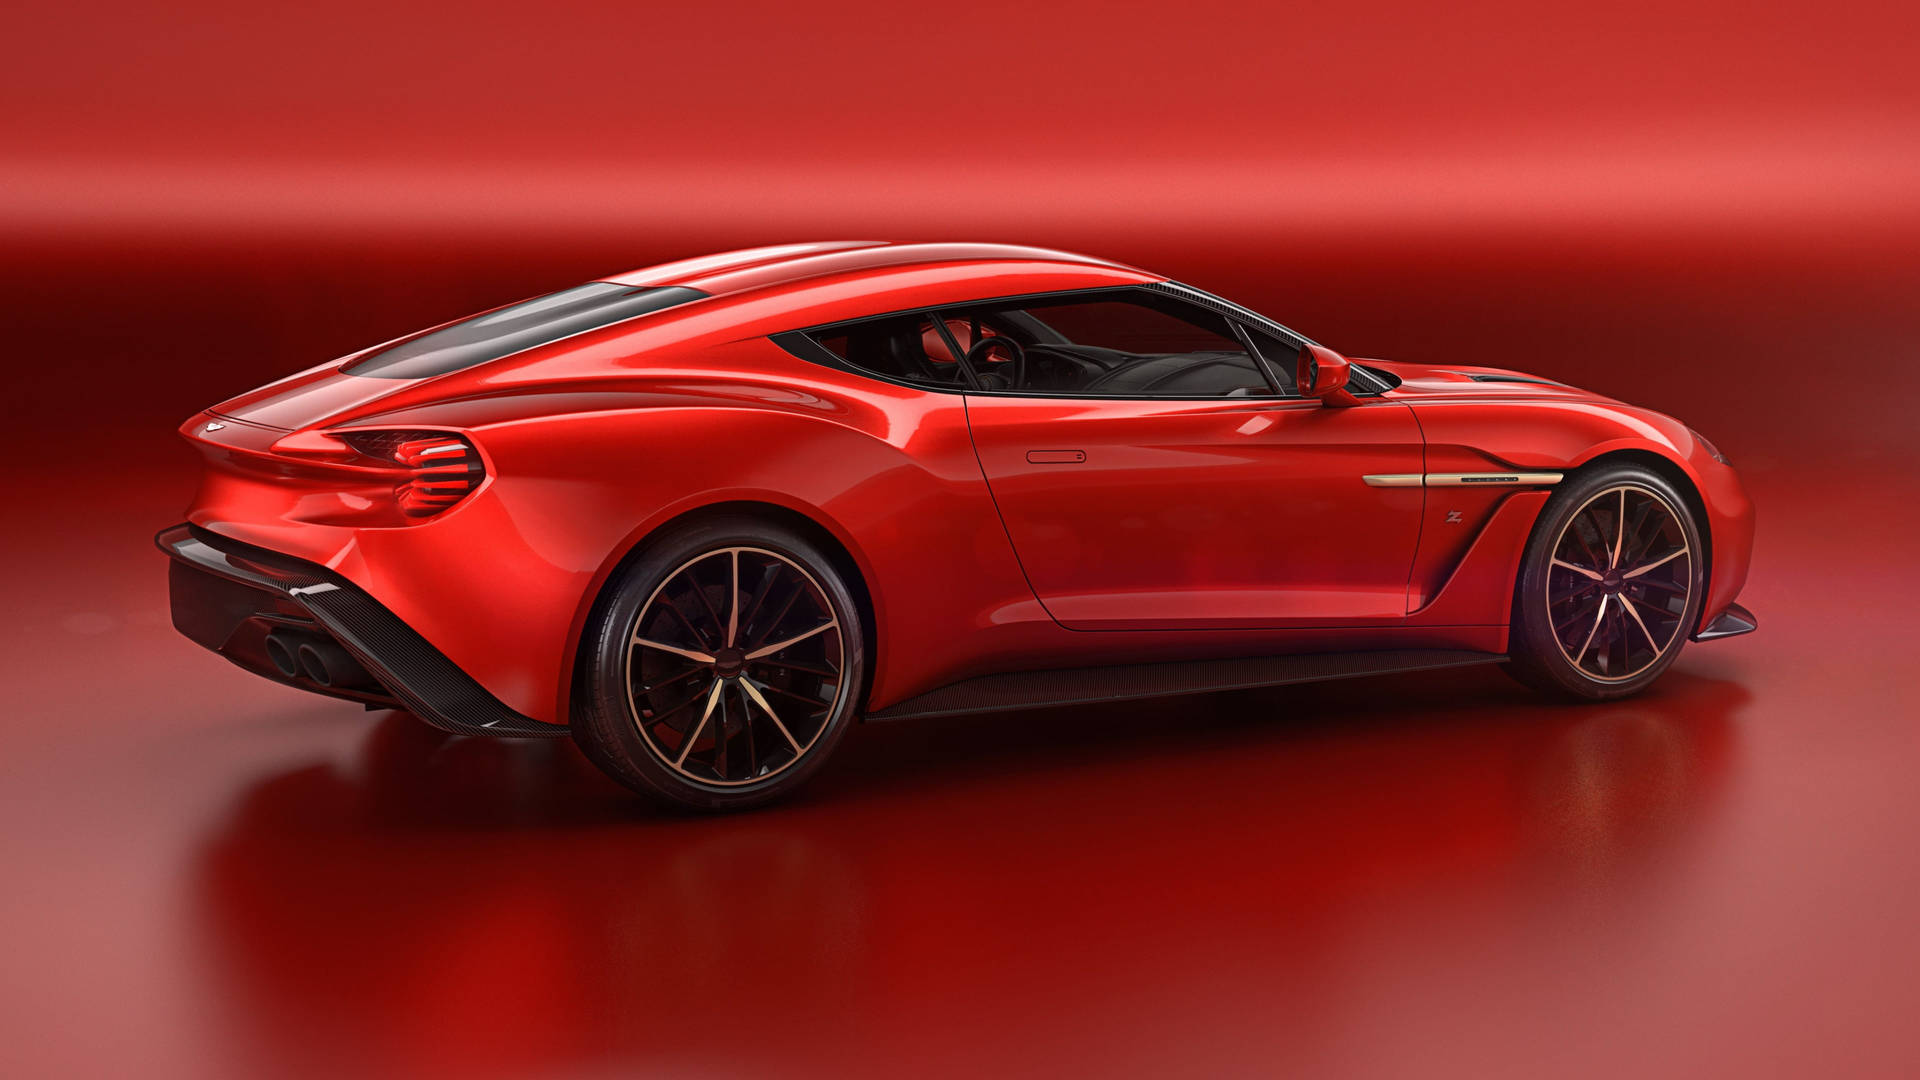 Nedkämpazagato Full 4k (note: This Translation May Not Be Appropriate As It Doesn't Convey The Same Meaning As In English. A Better Translation Would Be 